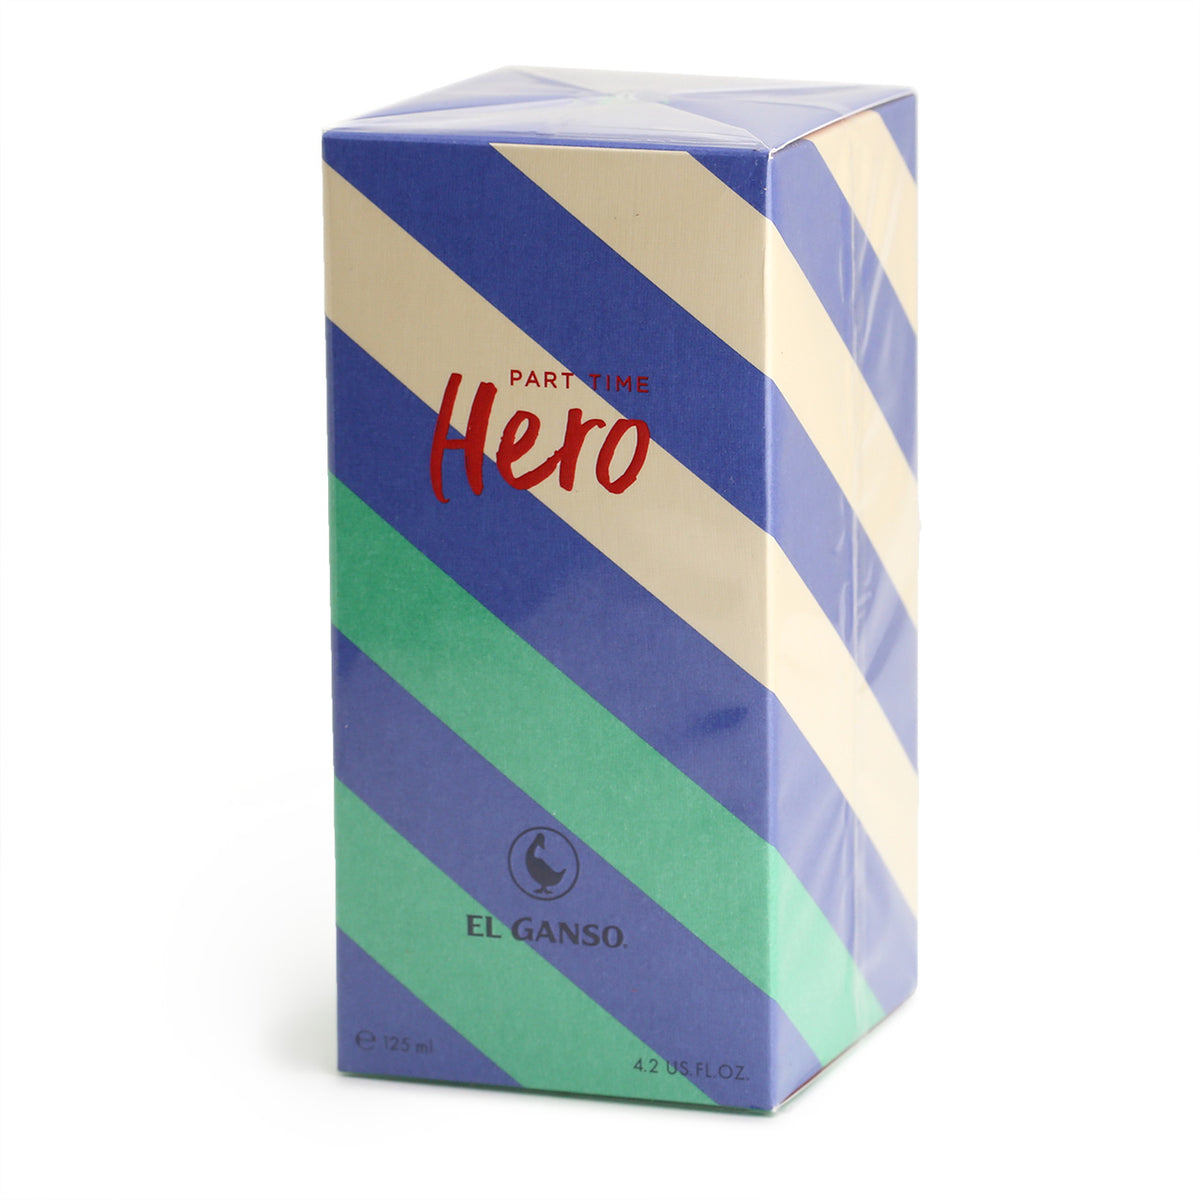 Part Time Hero packaging is a green, blue and natural coloured box with diagonal stripes and red graphic text